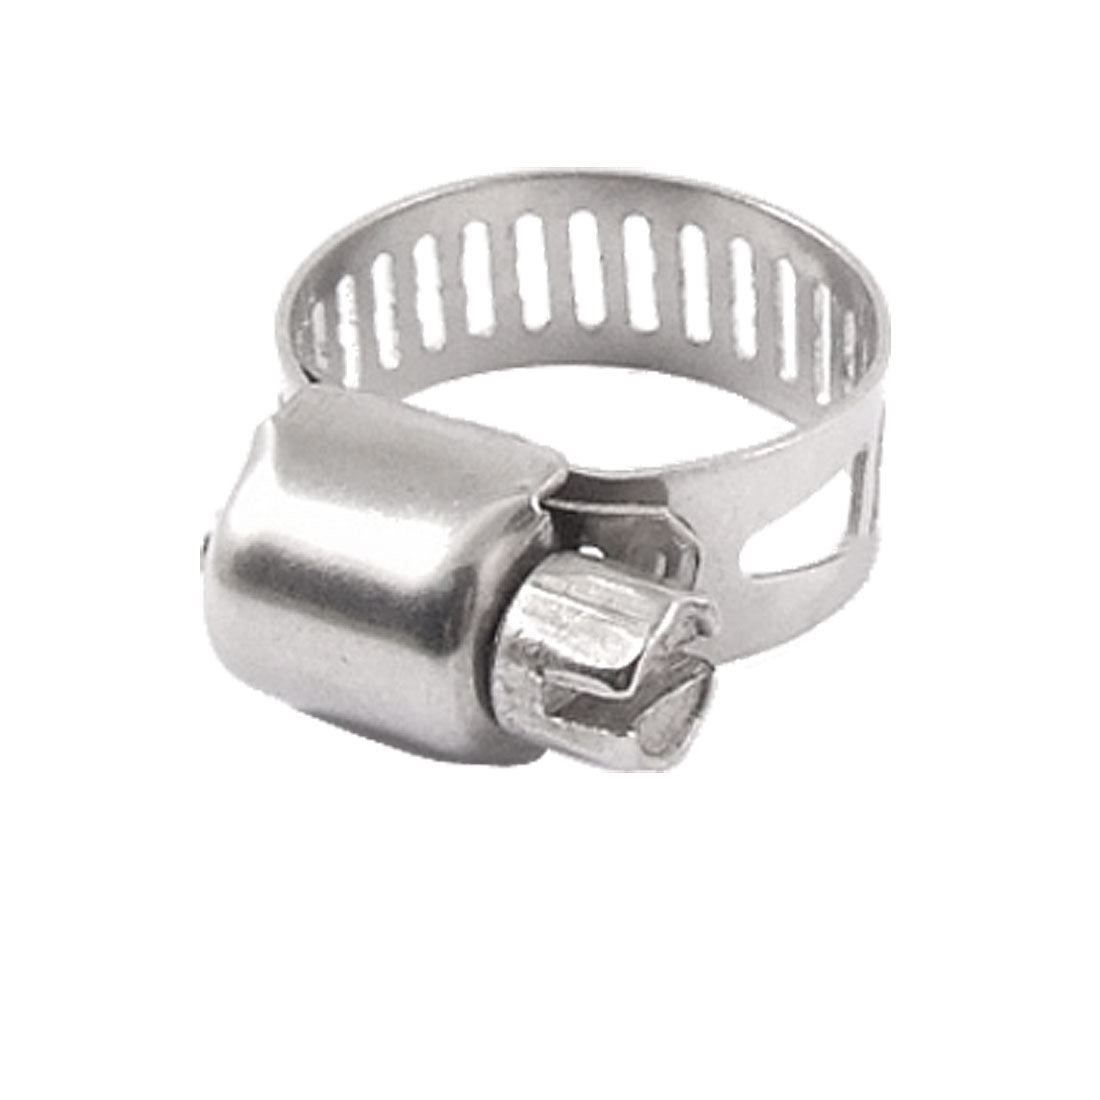 uxcell Uxcell 5 Pcs Stainless Steel Band  Gear Hose Clamp 13-19mm 1/2" - 3/4"